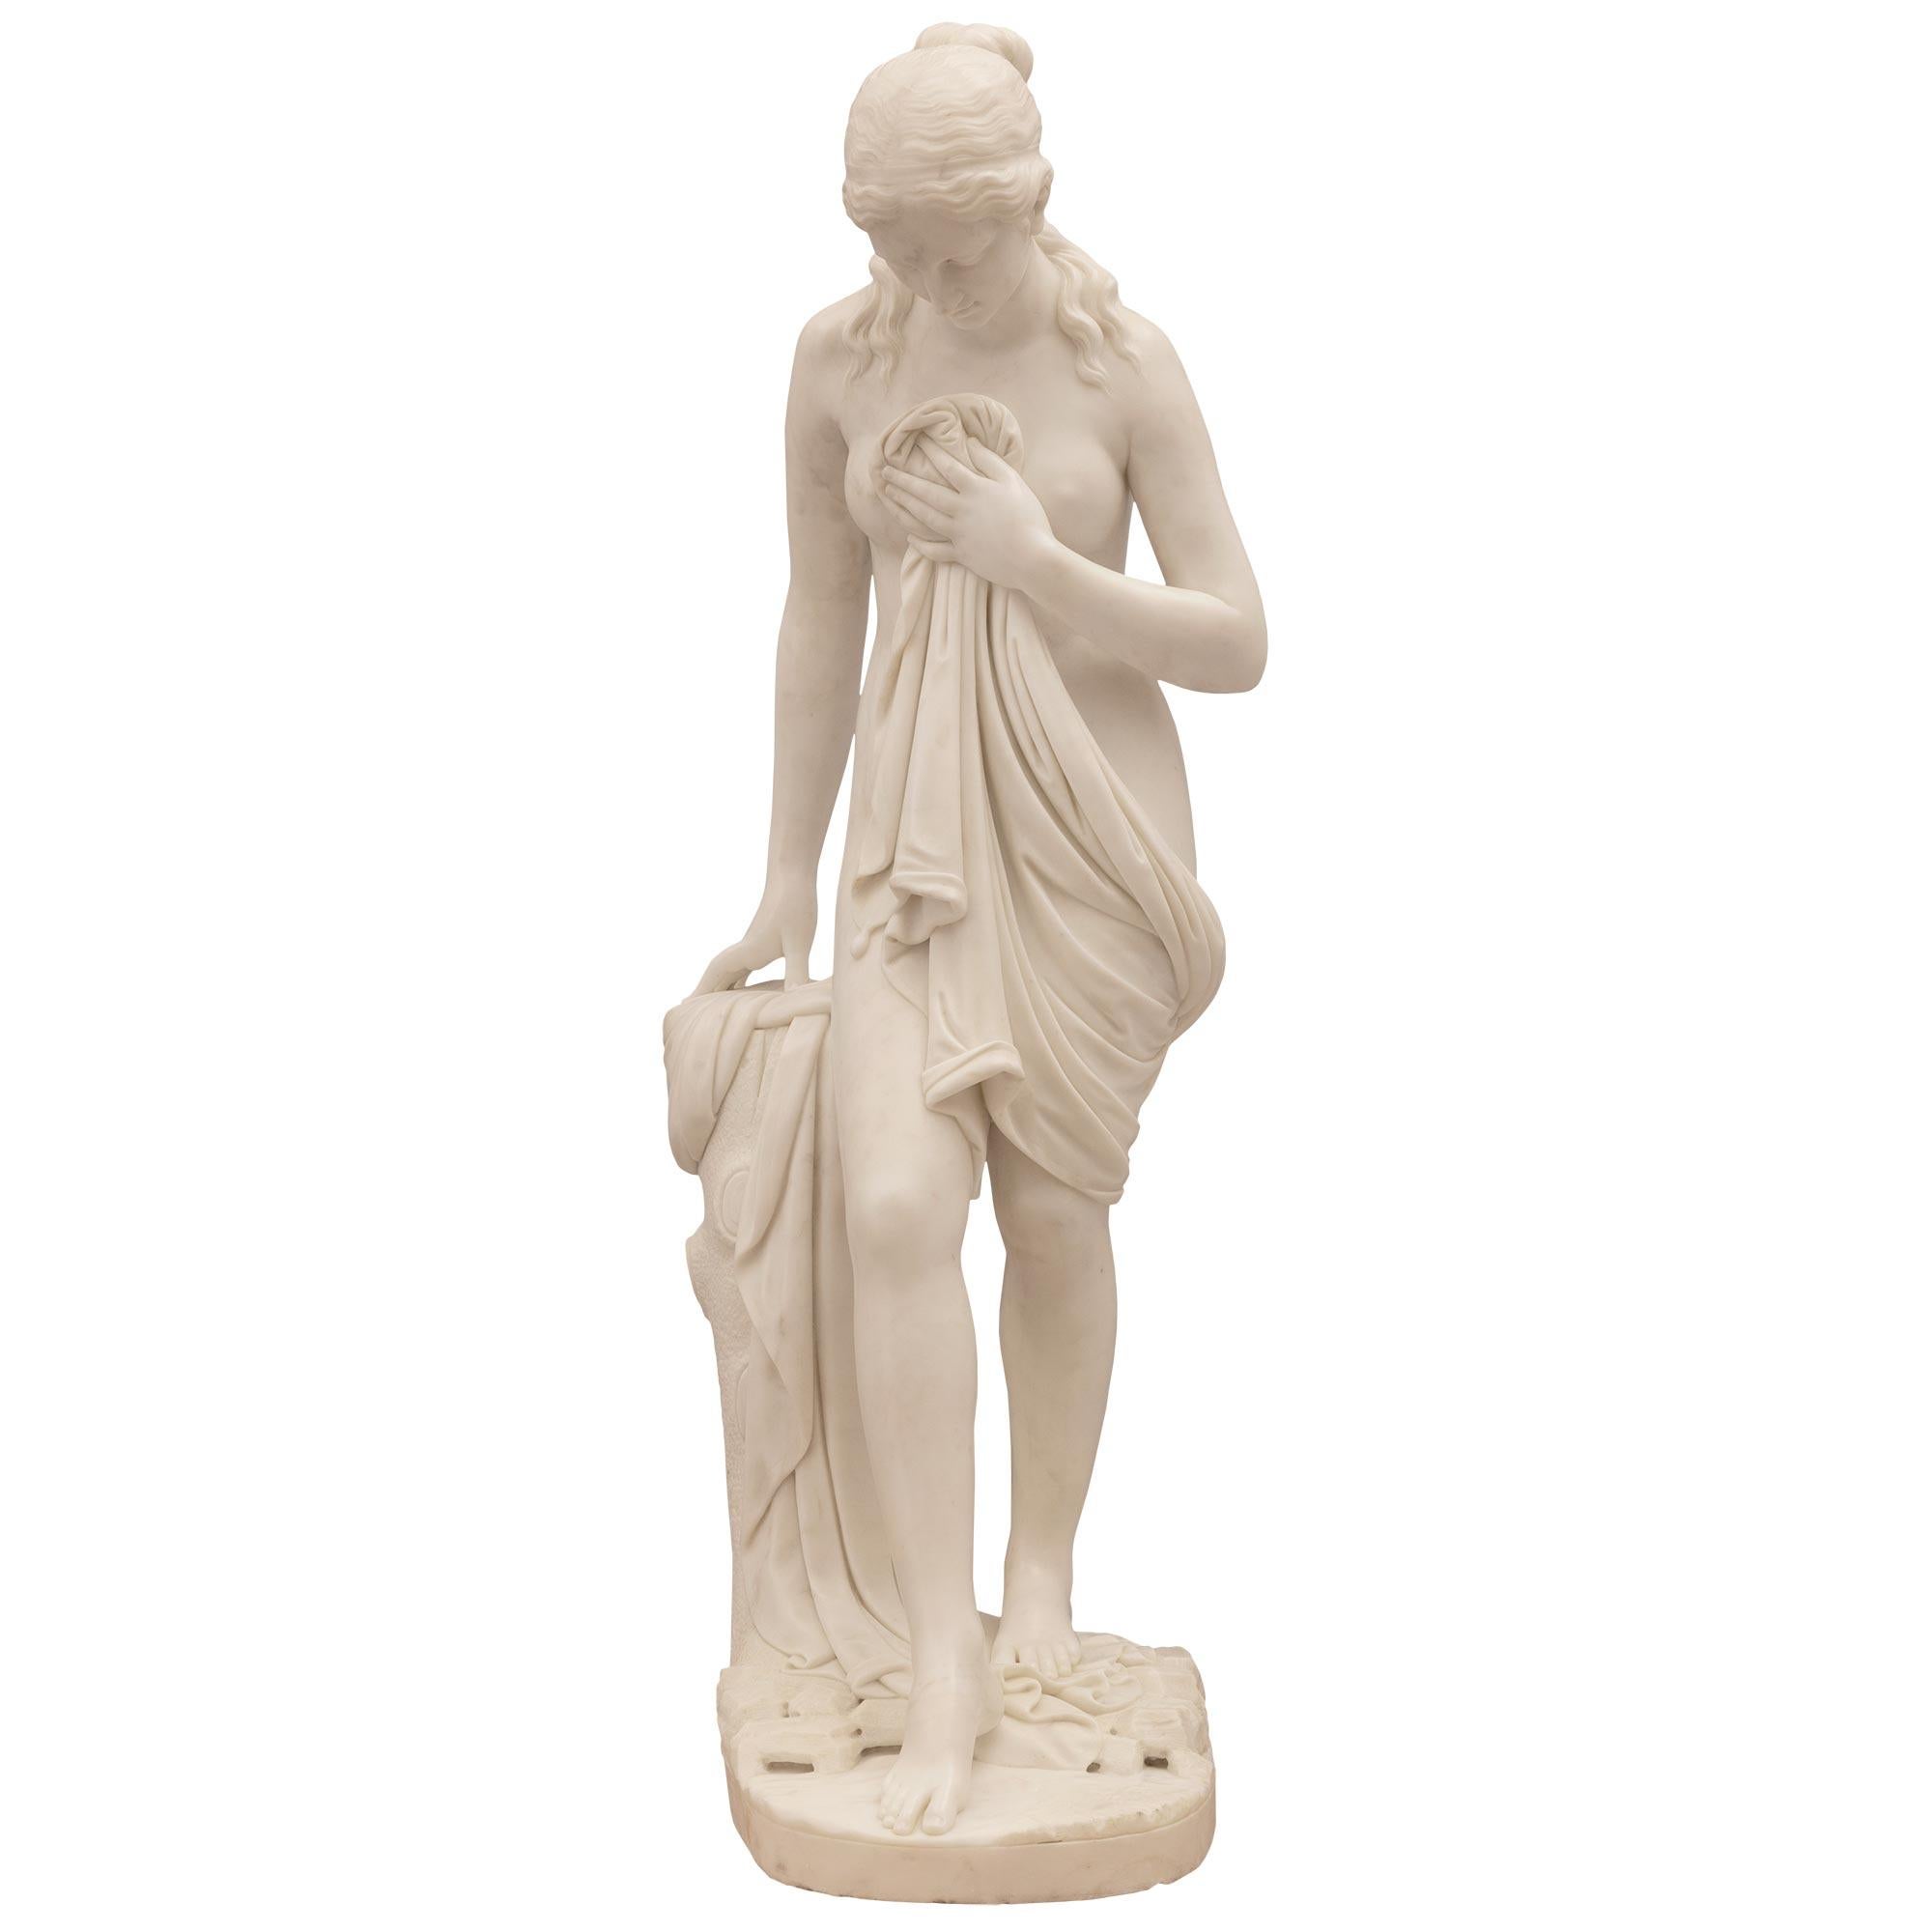 A stunning and extremely high quality Italian 19th century white Carrara marble statue of a beautiful bathing woman. The statue is raised by a ground designed base where the richly sculpted maiden is standing next to a tree trunk. She is draped in a